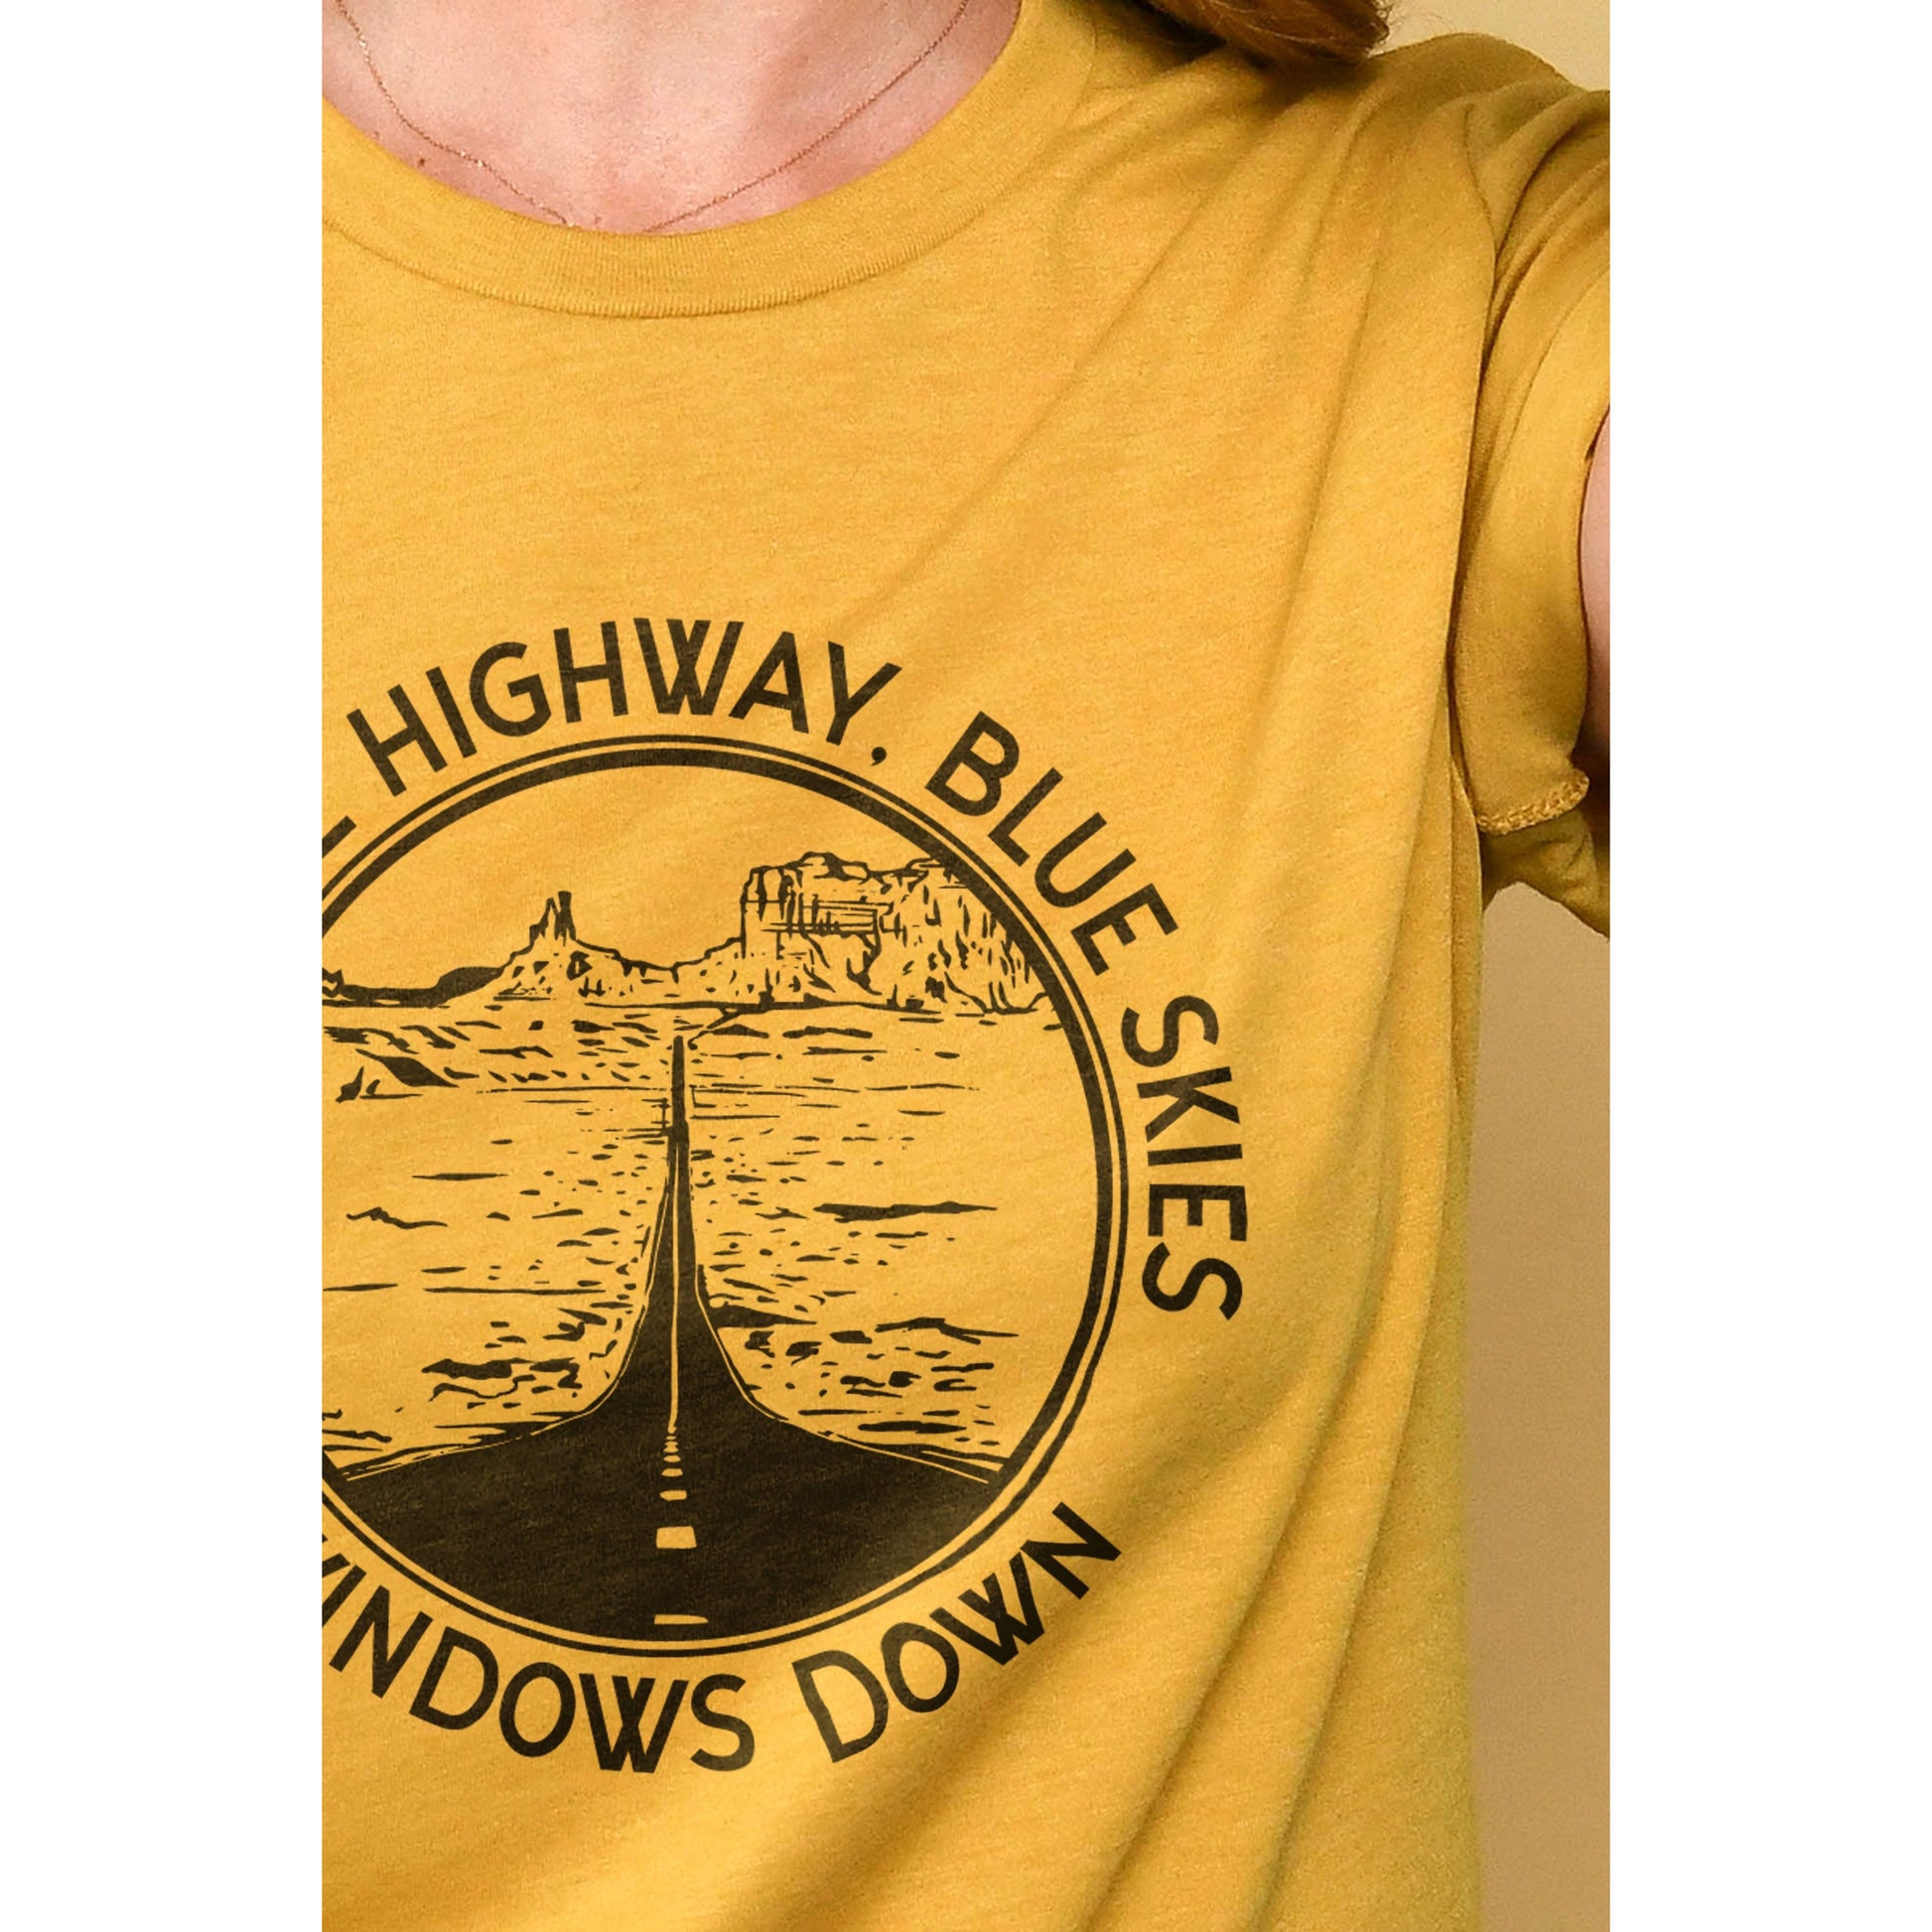 Just The Highway, The Blue Skies, Windows Down - thread tank | Stories you can wear.